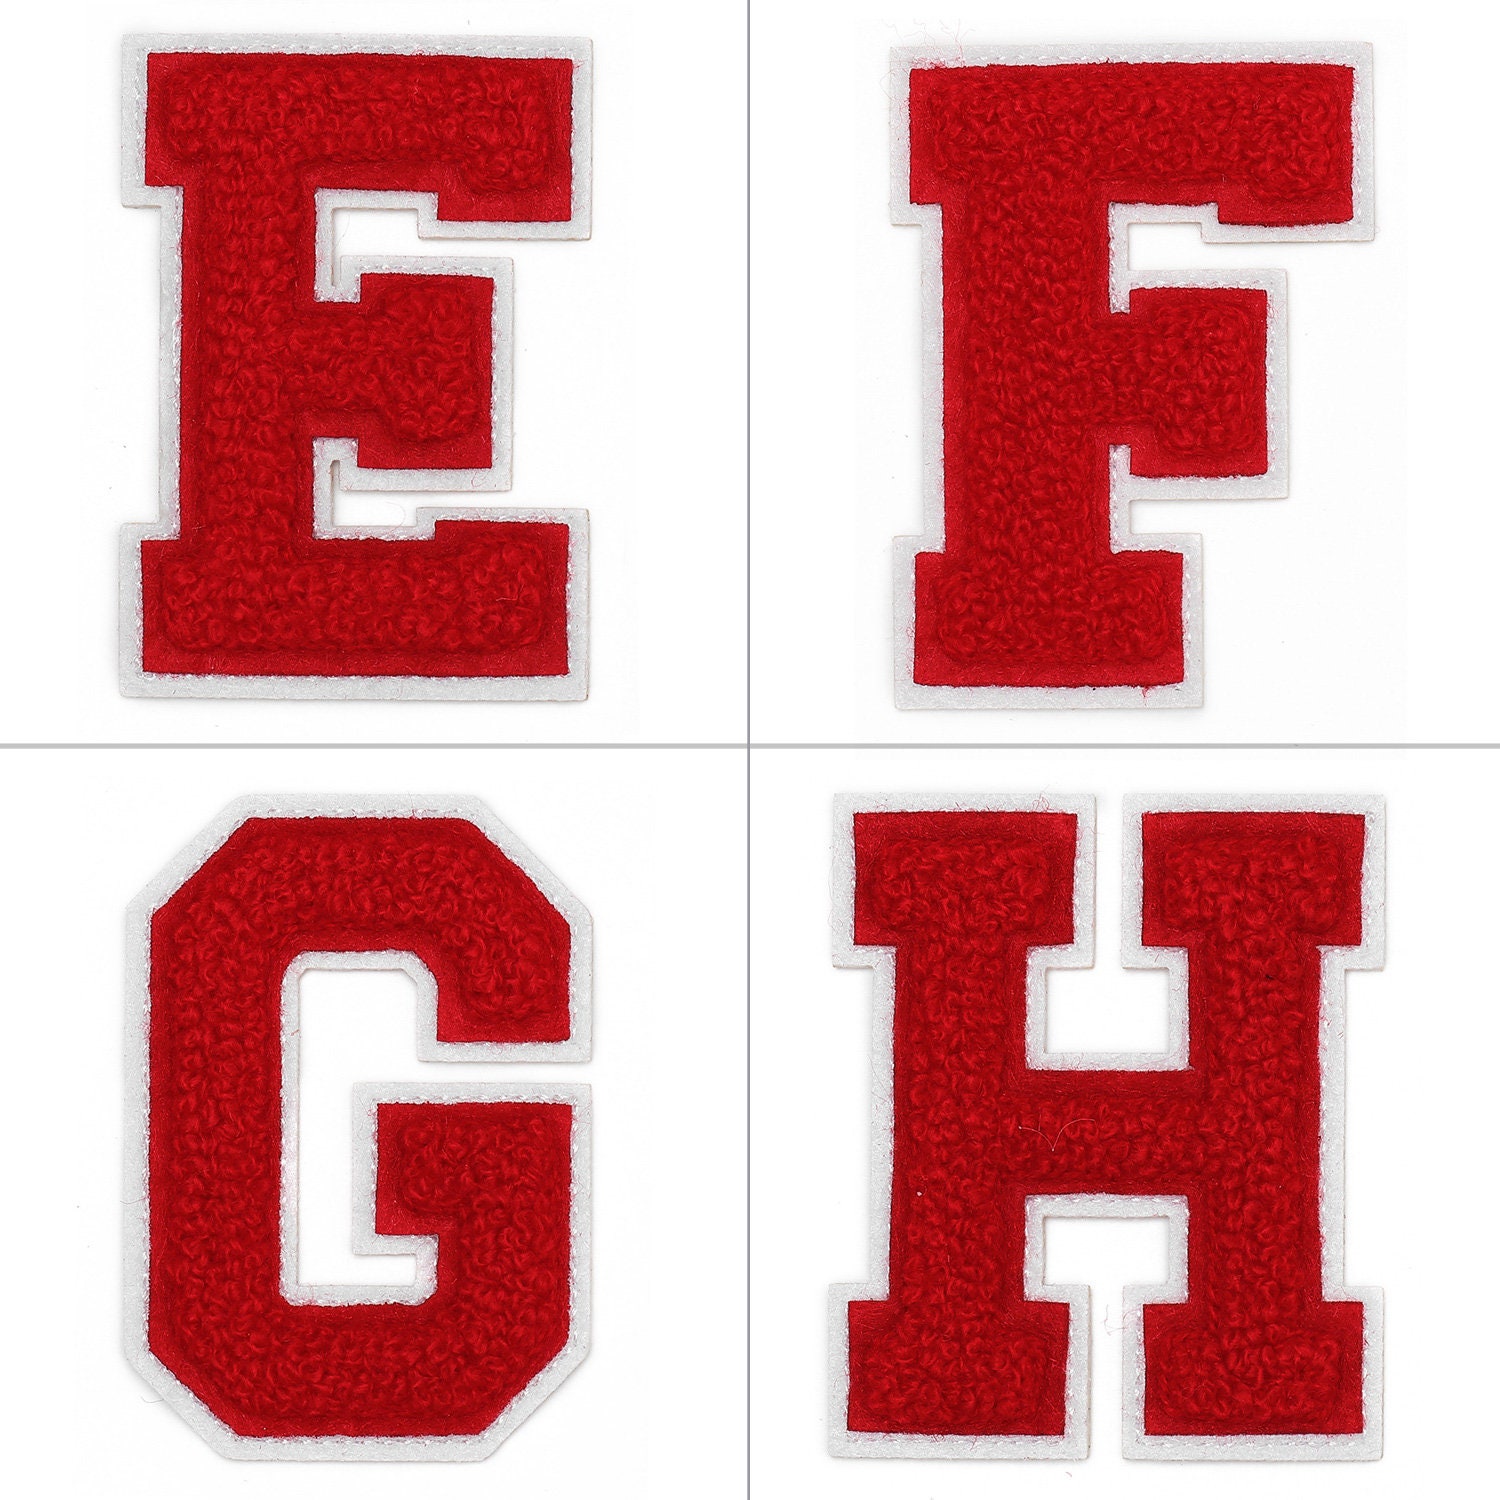 2 Pcs 2.4 Inches Chenille Letter Patches, Iron on Letters for Fabric Clothing/Hat/Bag, A-Z Varsity Letters Iron on Patches - Blue, Letter E